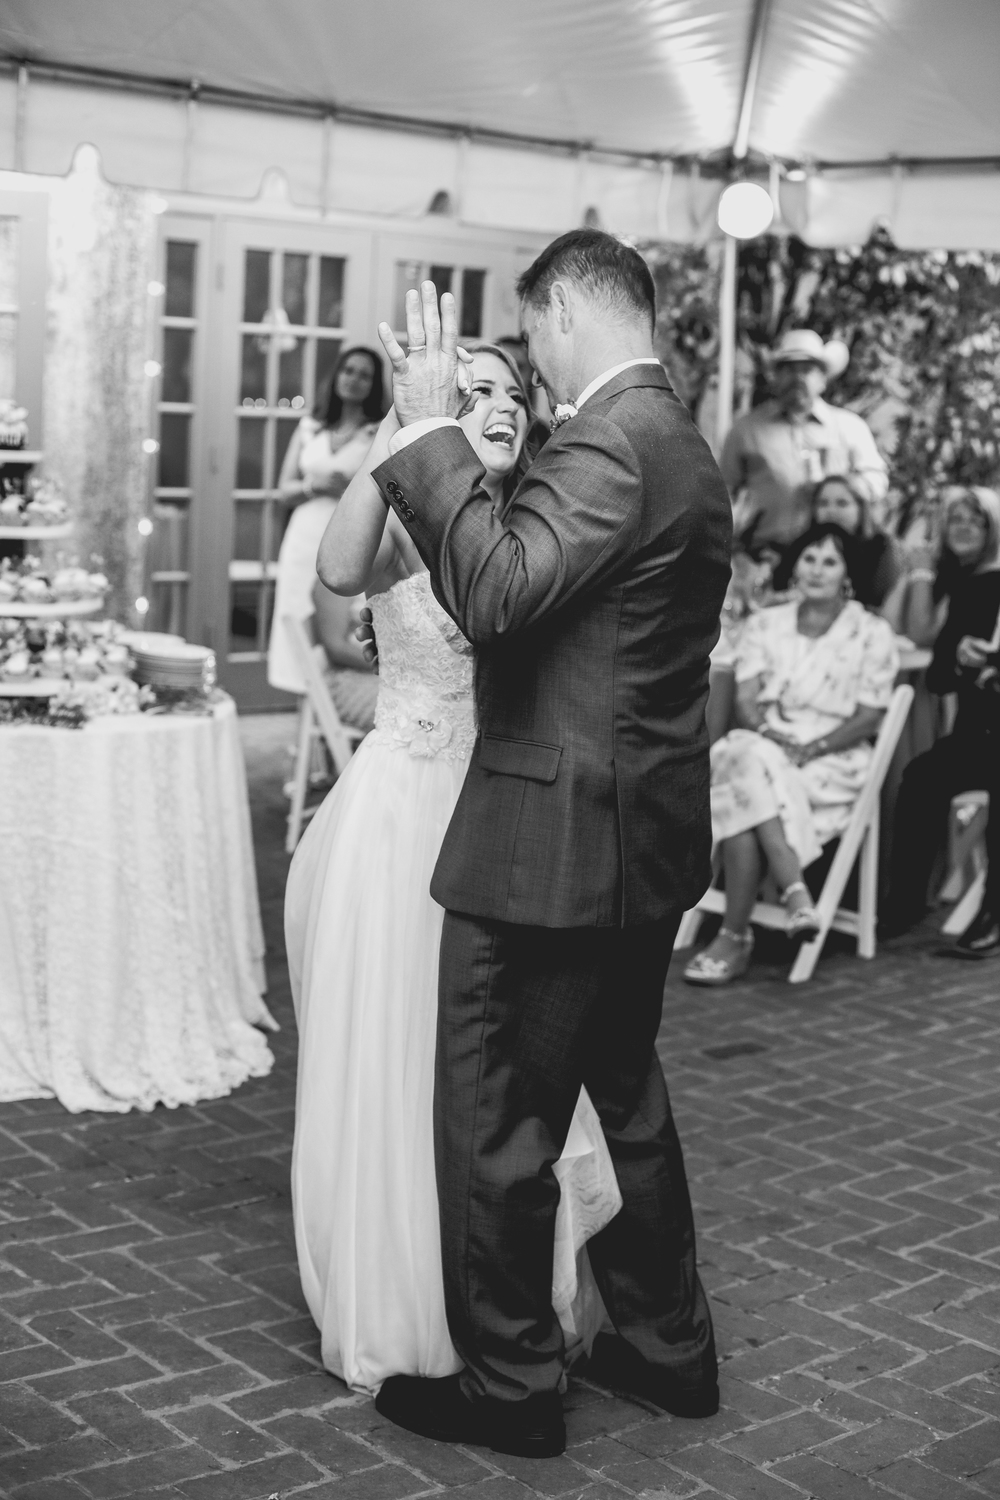   The Bride Dancing with Her Father   | #HisQueenHerEngelking Wedding | Photography by Two Arrows Photography at twoarrowsphoto.com  